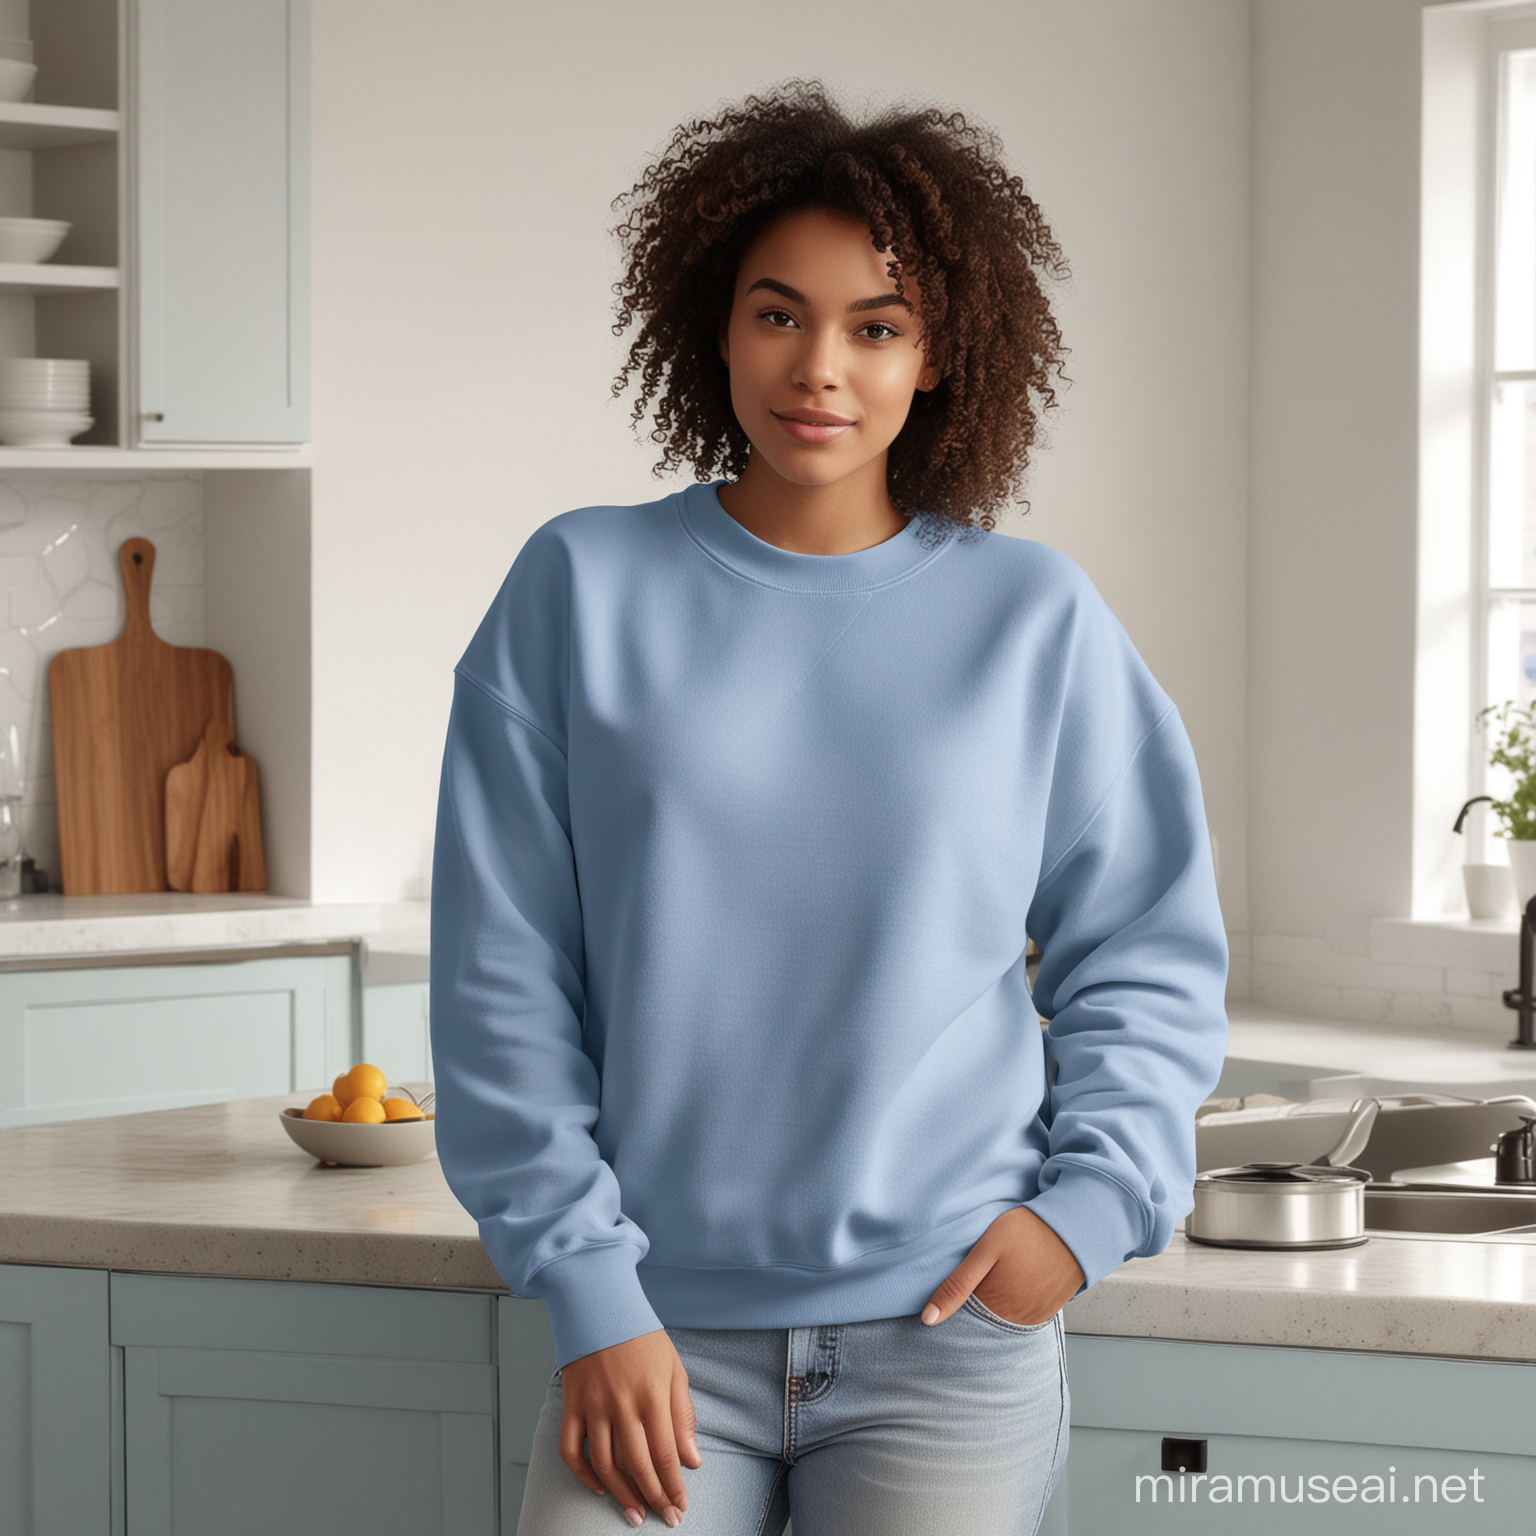 Gildan 1800 oversized sweatshirt in indiglo blue colour with model in a modern warm white kitchen